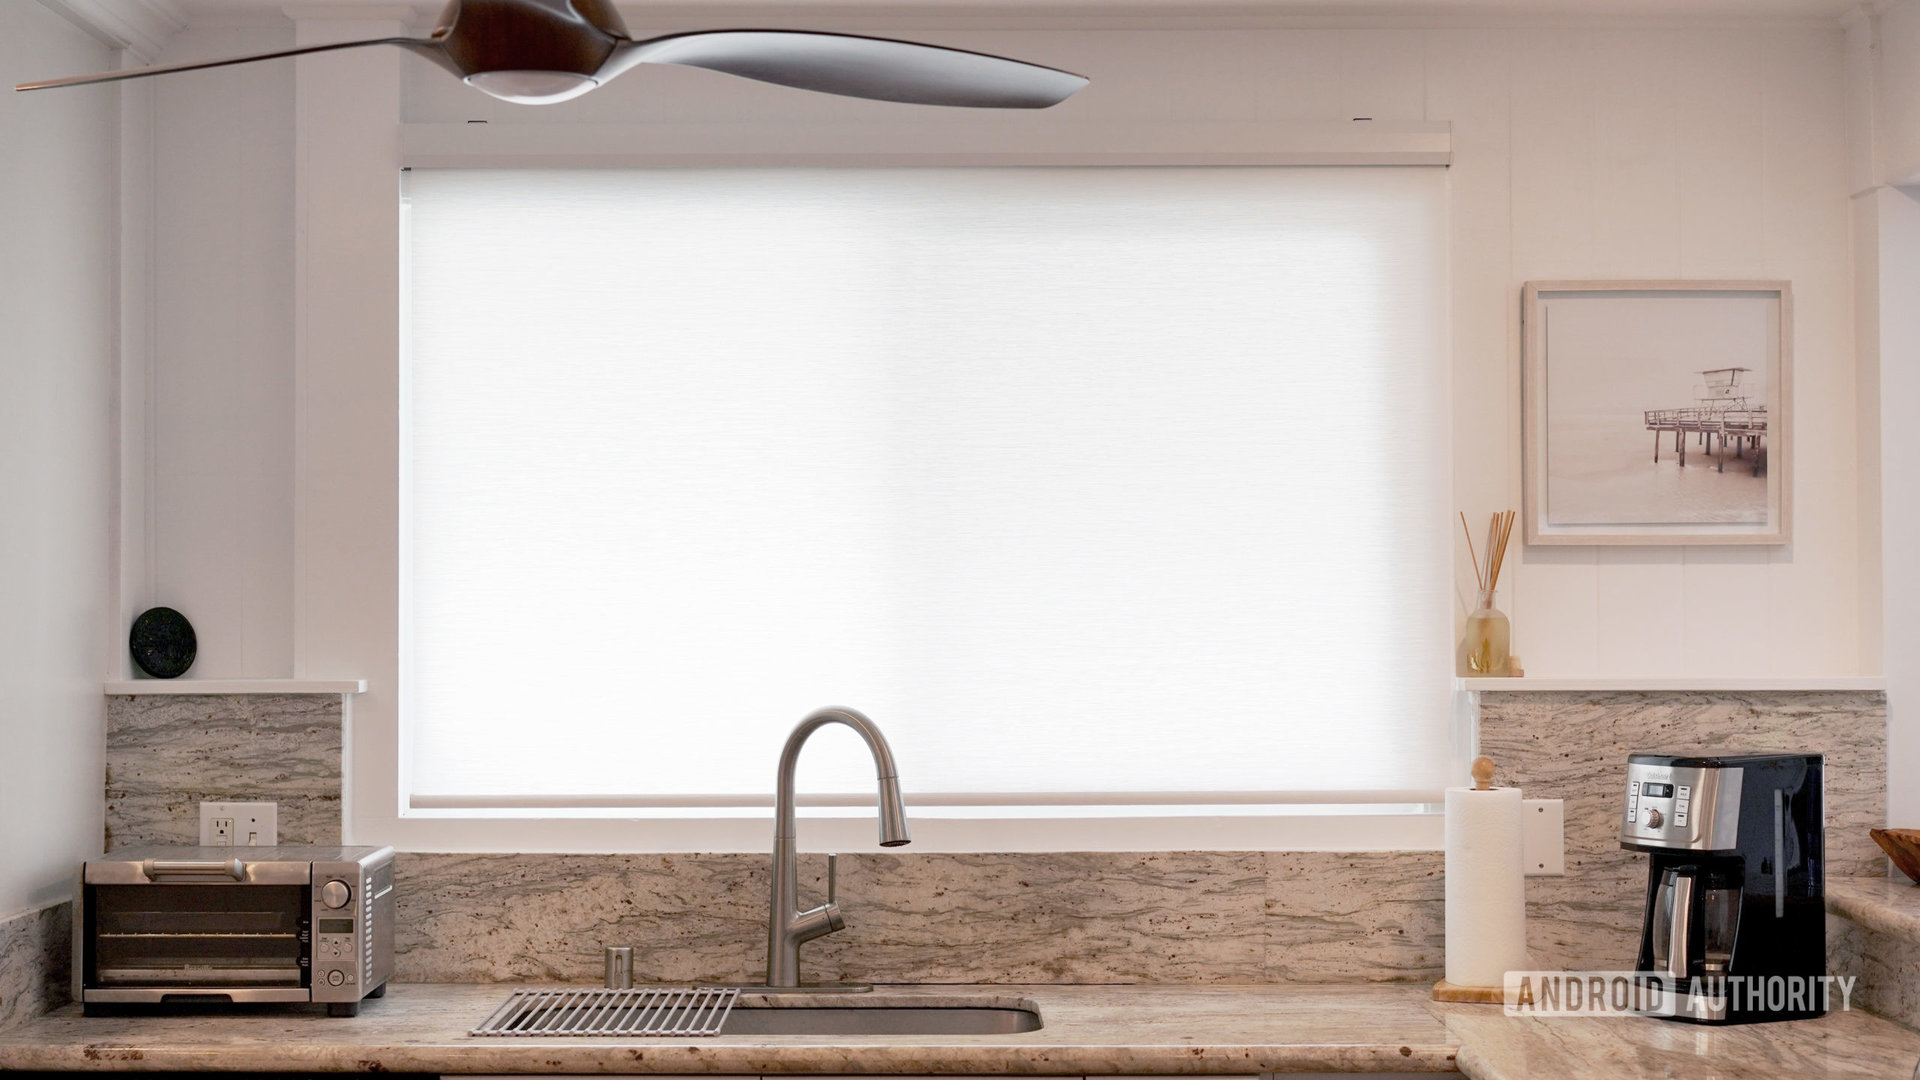 A partial sheer smart blind lets sunlight into a kitchen while still allowing privacy.